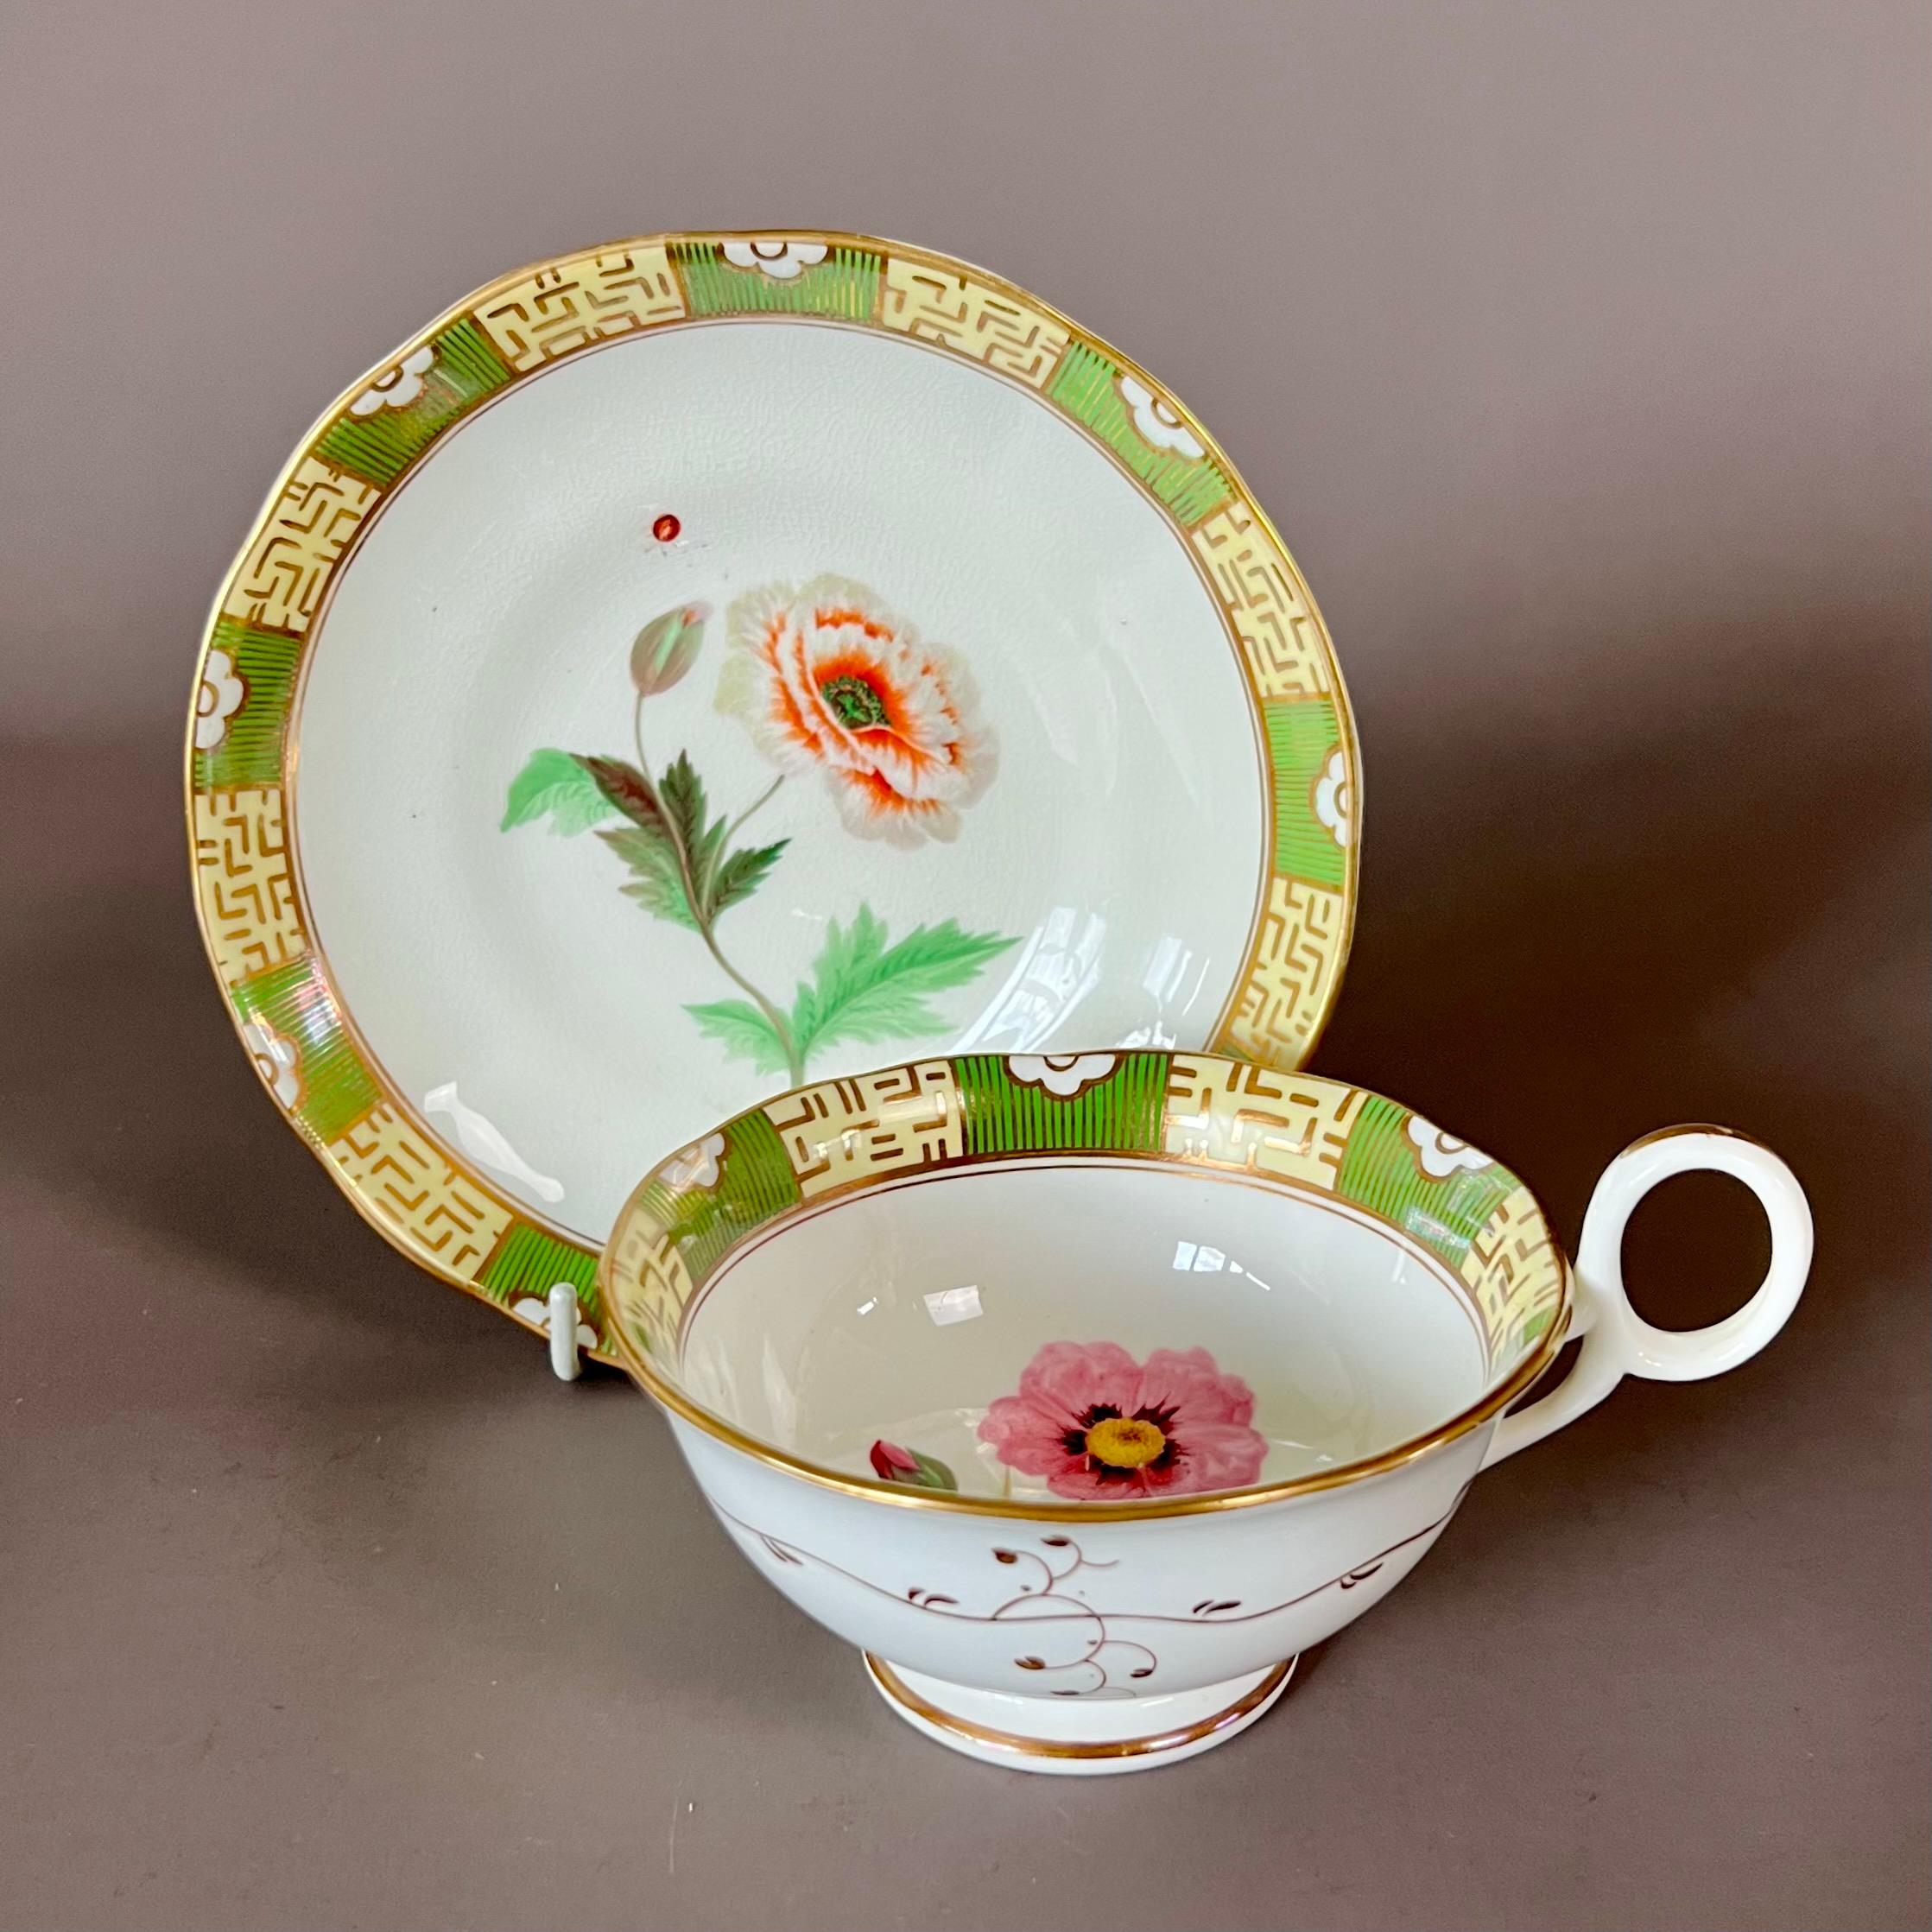 A teacup and saucer with ring handle, with green and pale yellow ground in Japanese style, and beautiful flower studies in the centre of each item and a little ladybird on the saucer

Pattern 8184
Year: ca 1843
Size: teacup 10.2cm (4“), saucer 15cm